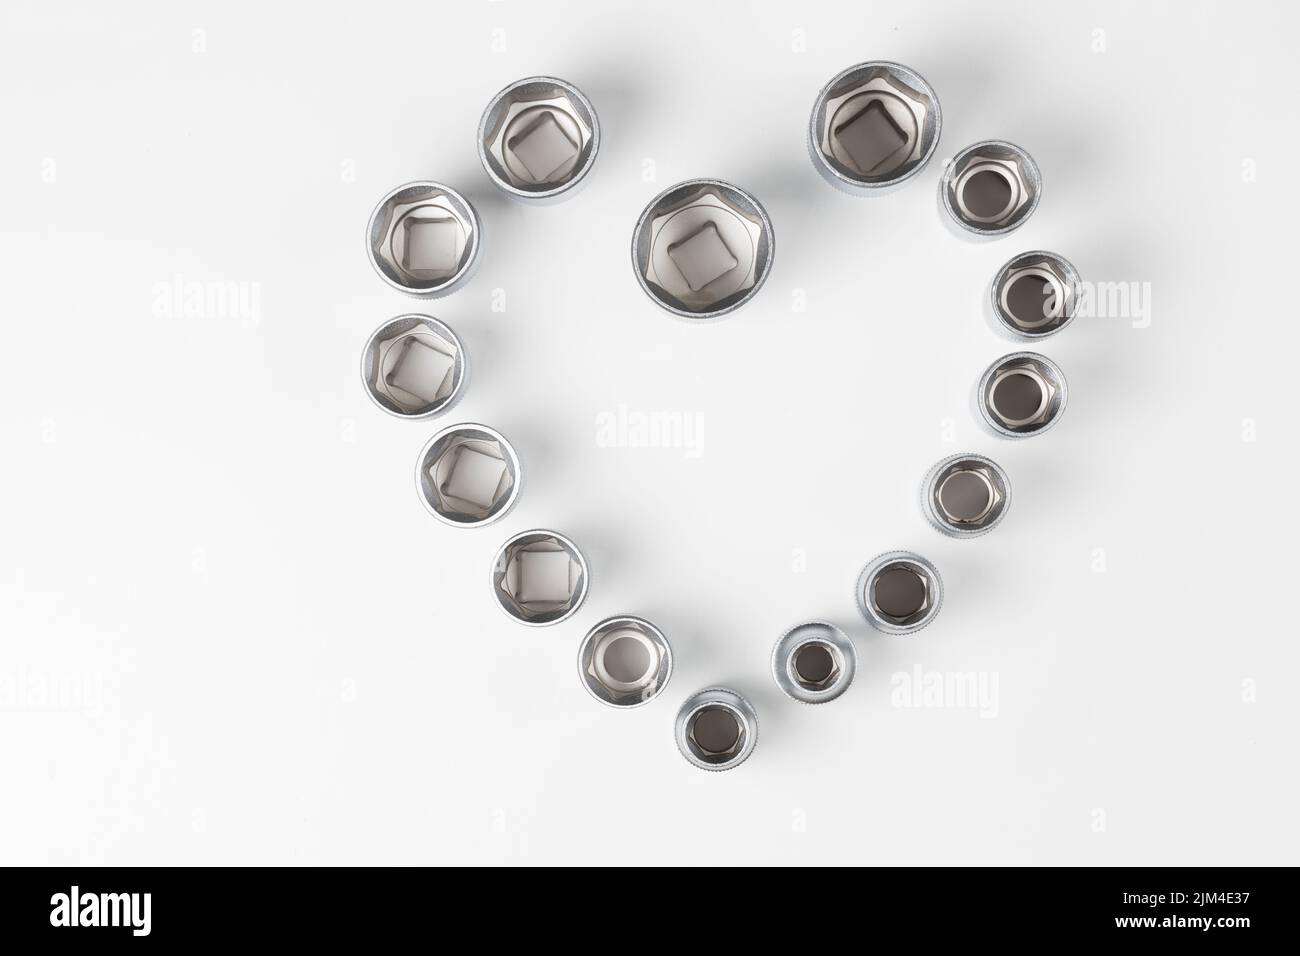 Hexagonal nests of different sizes in the shape of a heart on a white surface Stock Photo